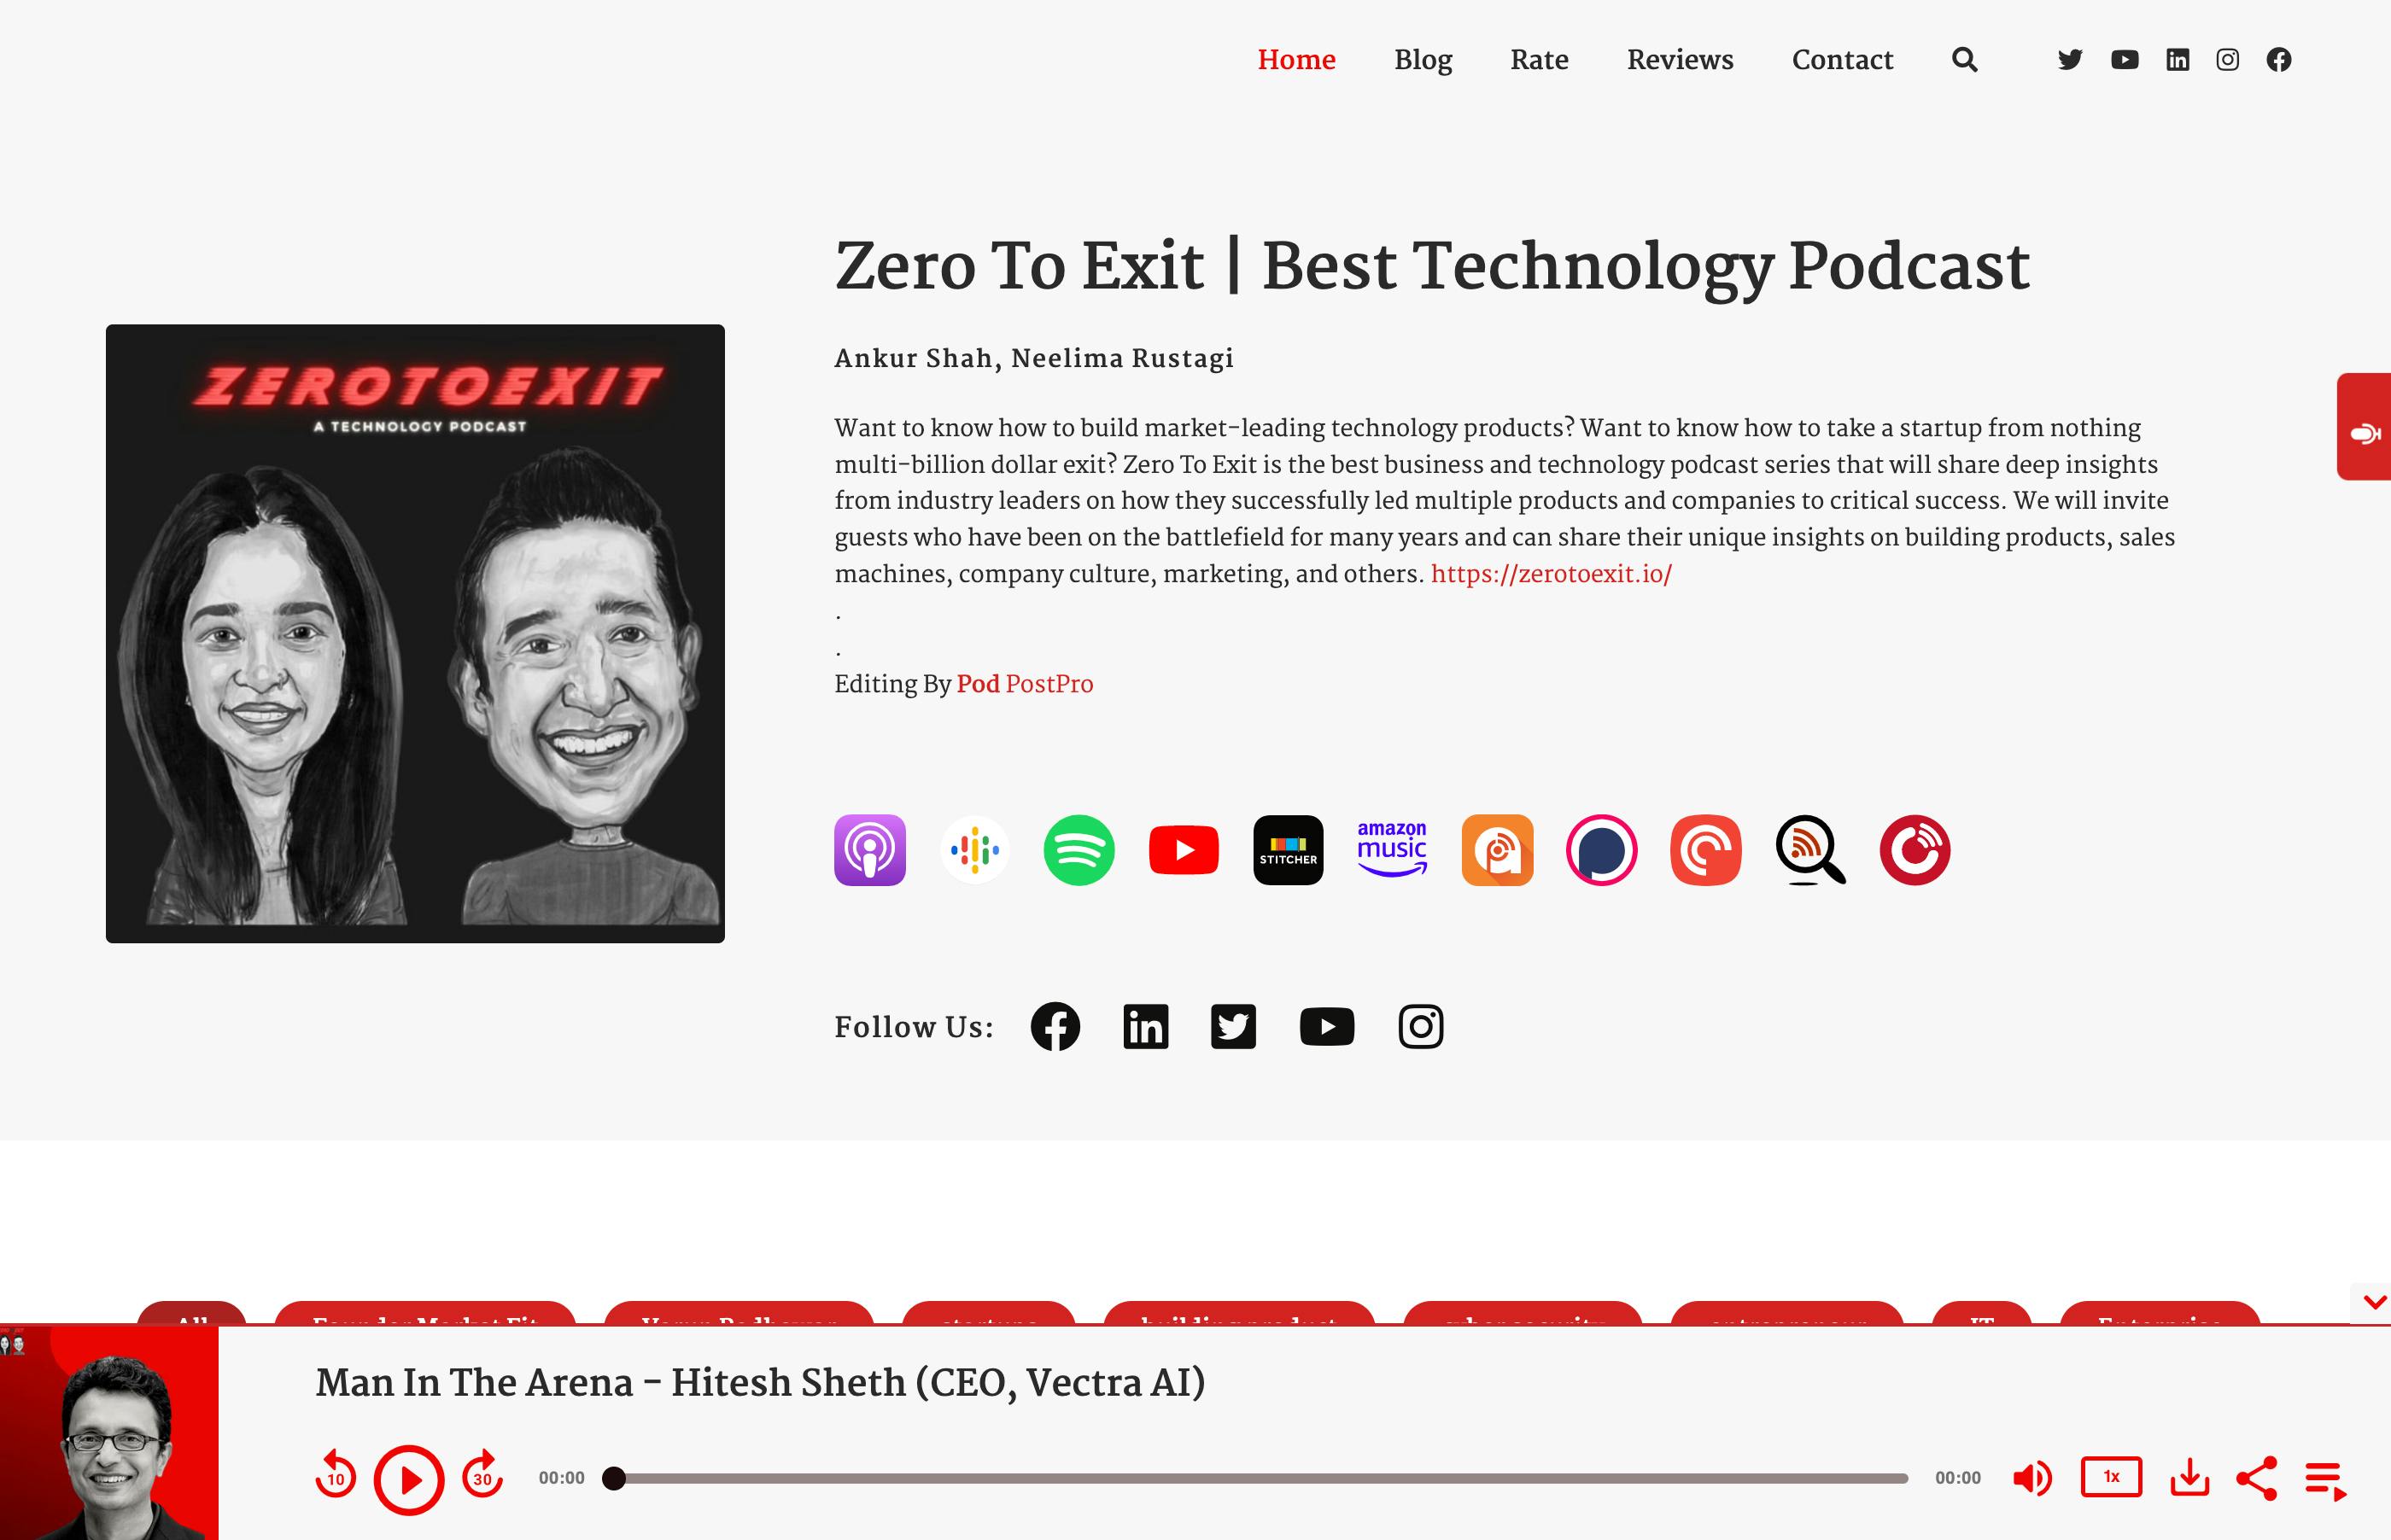 Zero to Exit podcast page